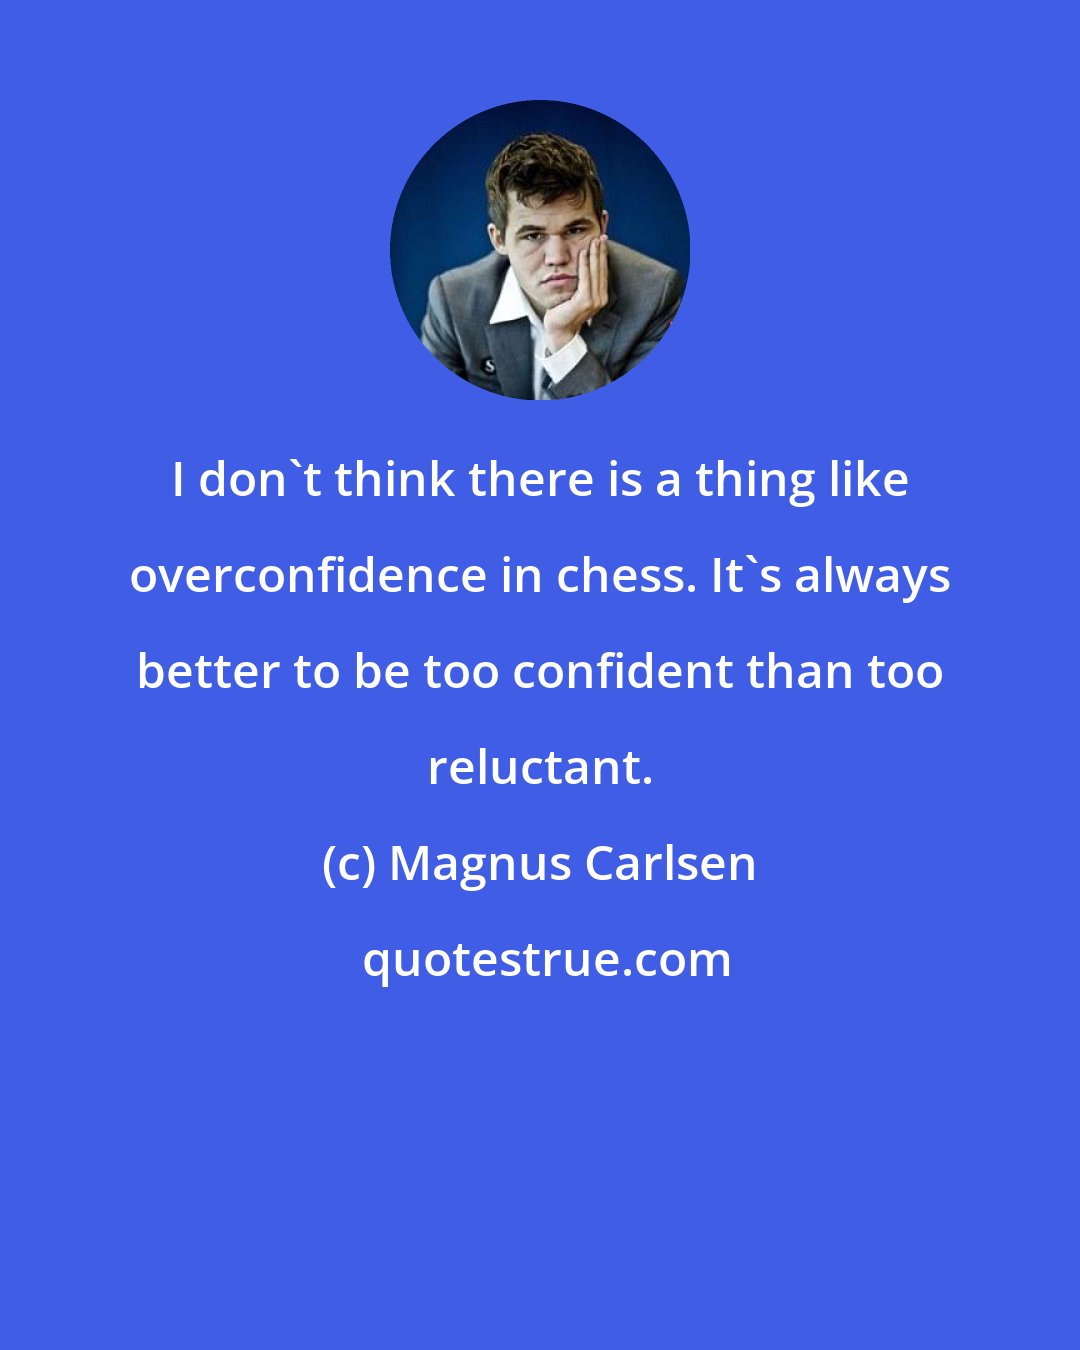 Magnus Carlsen: I don't think there is a thing like overconfidence in chess. It's always better to be too confident than too reluctant.